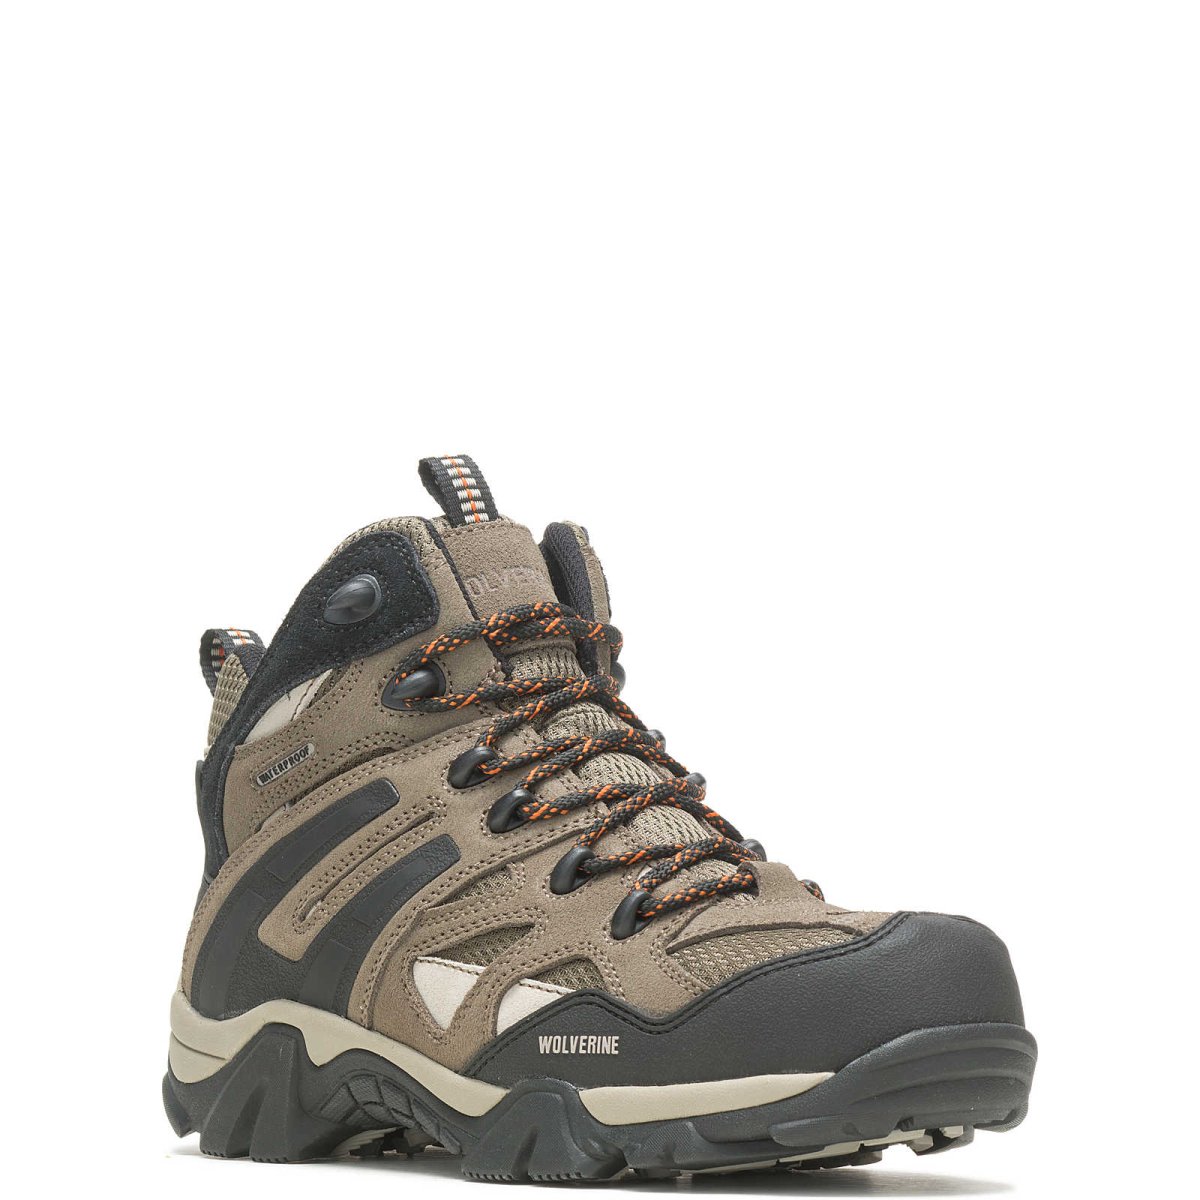 WOLVERINE WILDERNESS MEN'S BOOT (W880350) IN BUNGEE CORD - TLW Shoes